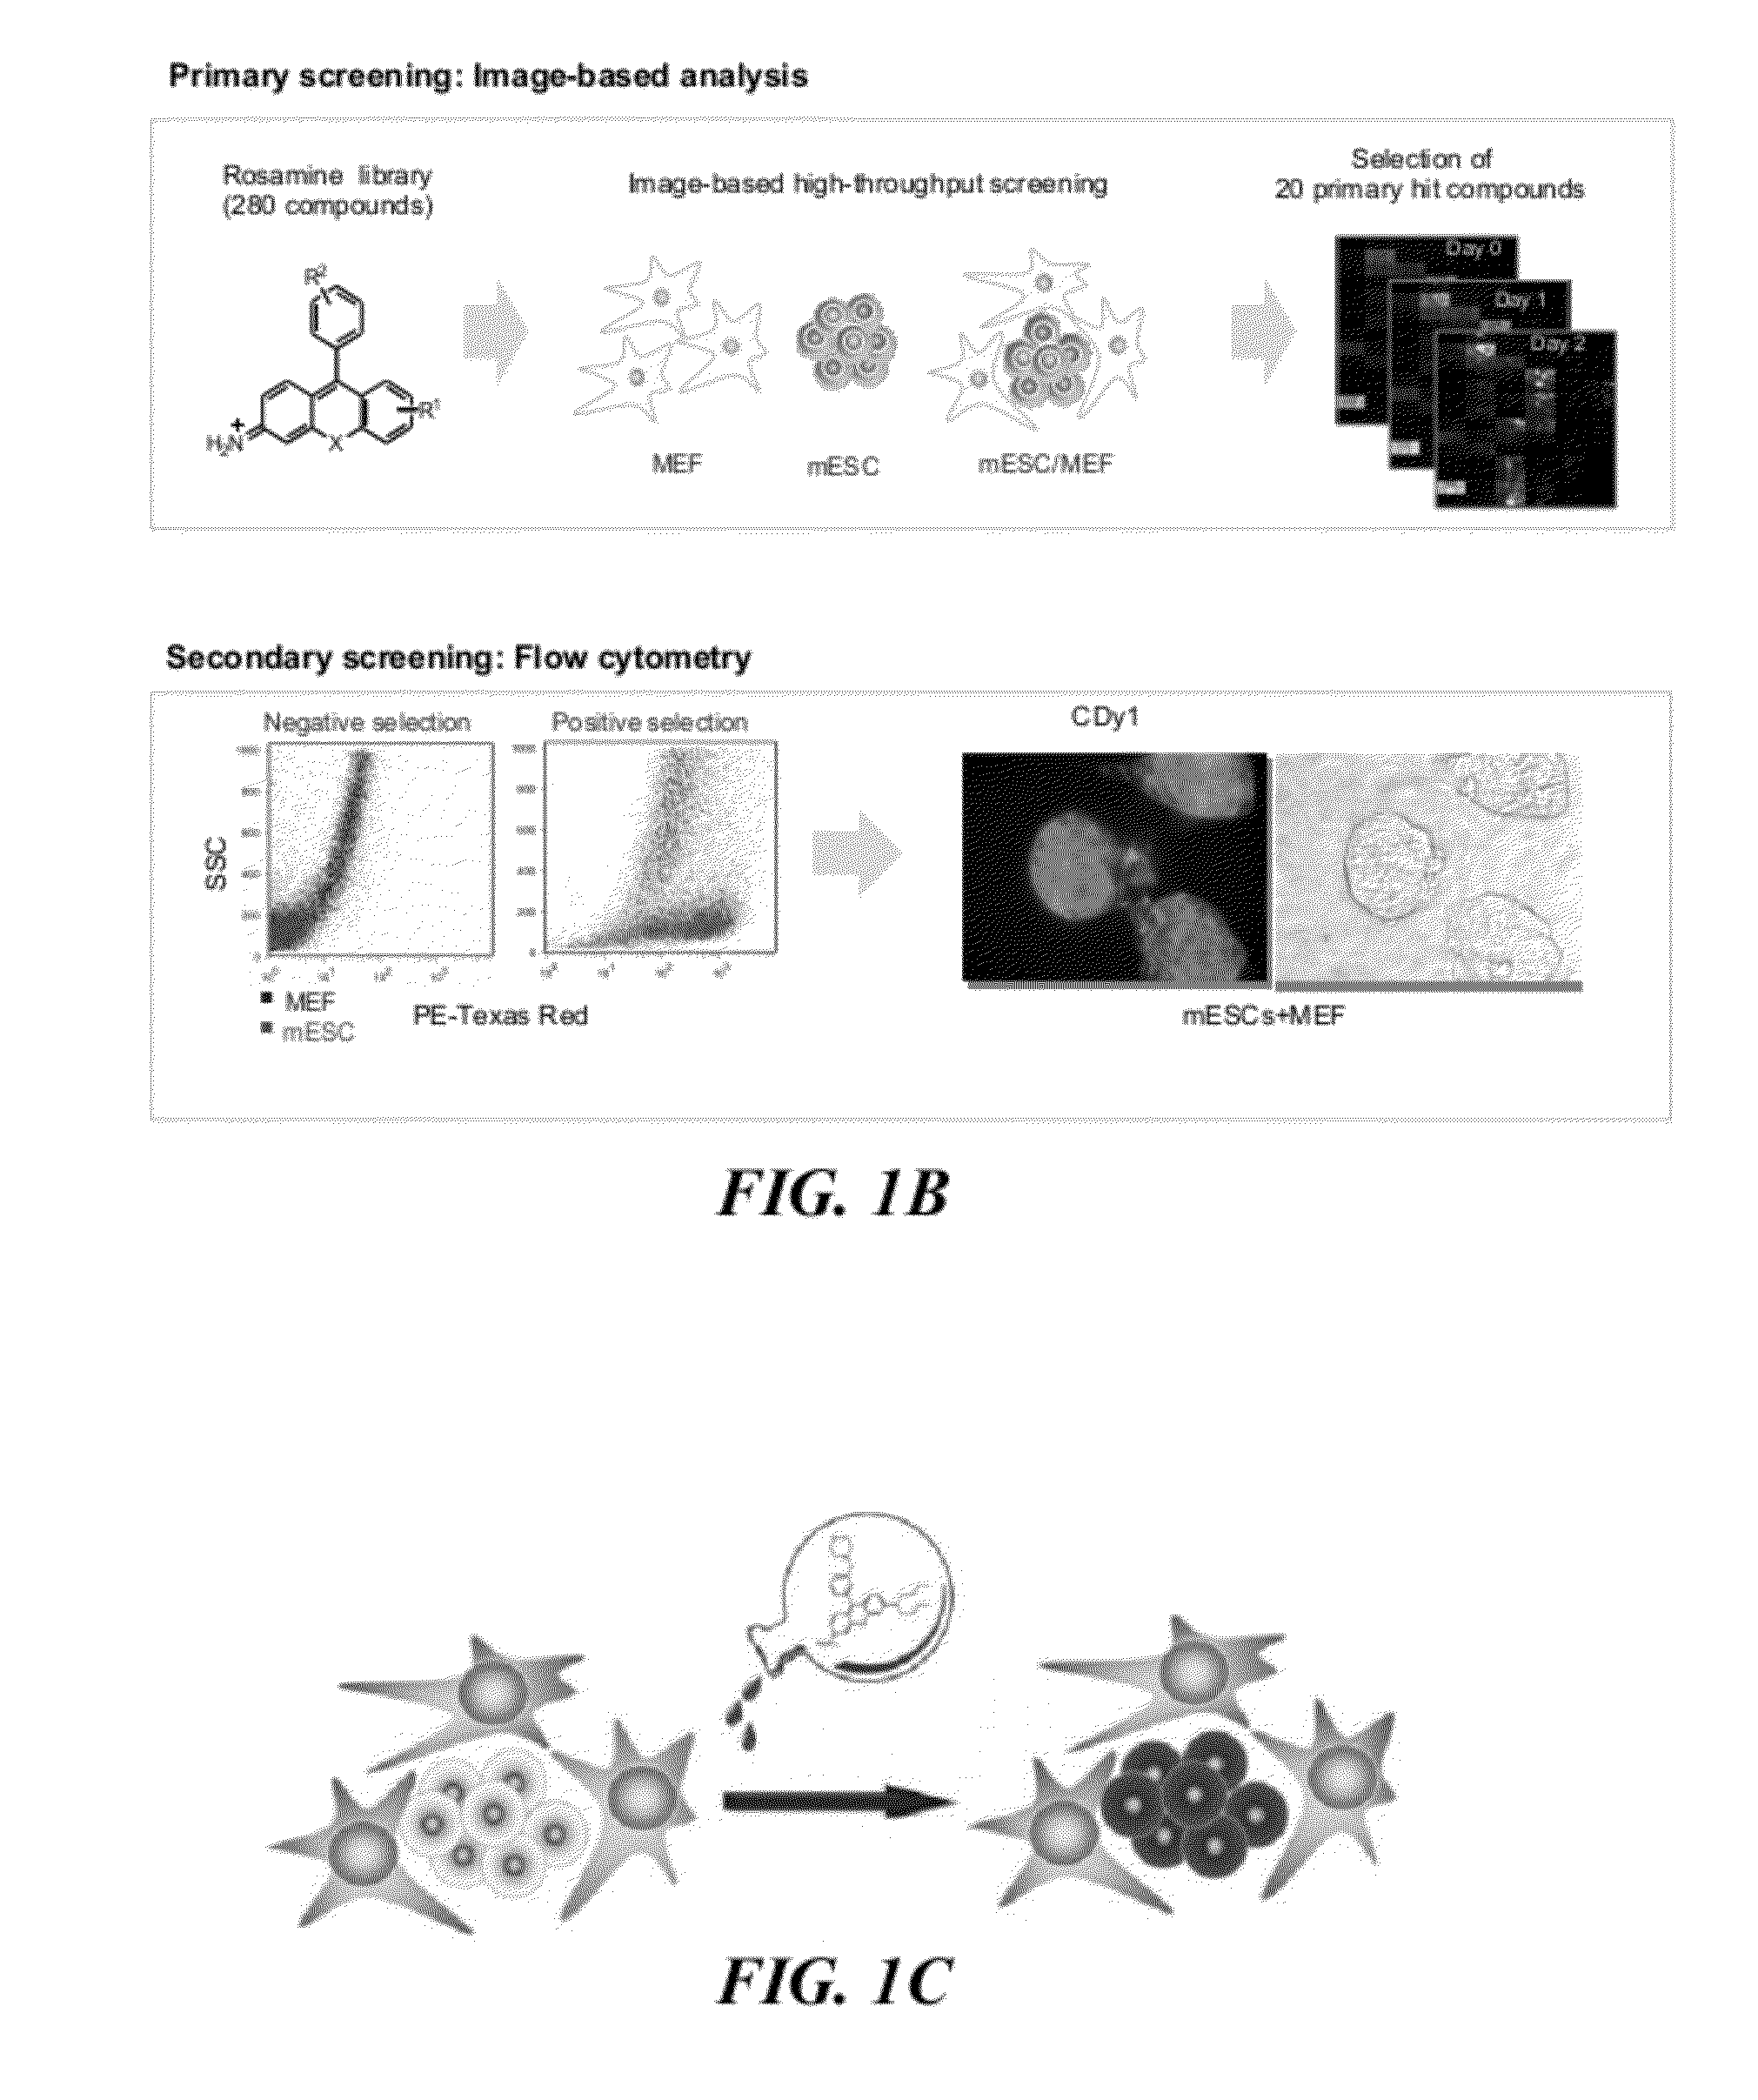 Methods for detecting embryonic stem cells, induced pluripotent stem cells, or cells undergoing reprogramming to produce induced pluripotent stem cells